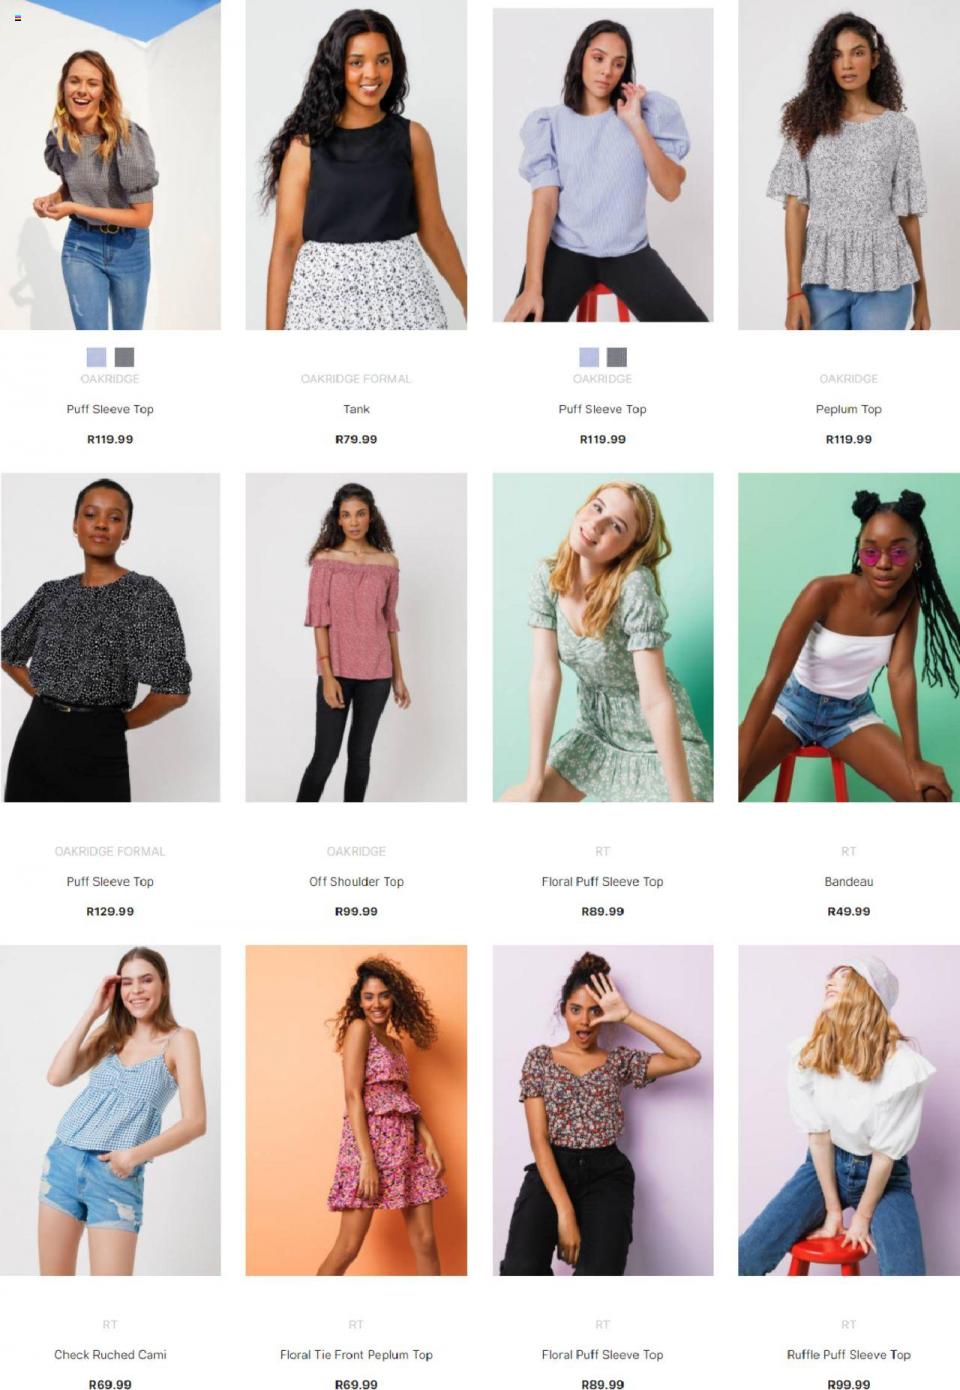 Mr Price Catalogue | Mr Price Specials | Mr Price Online Shopping